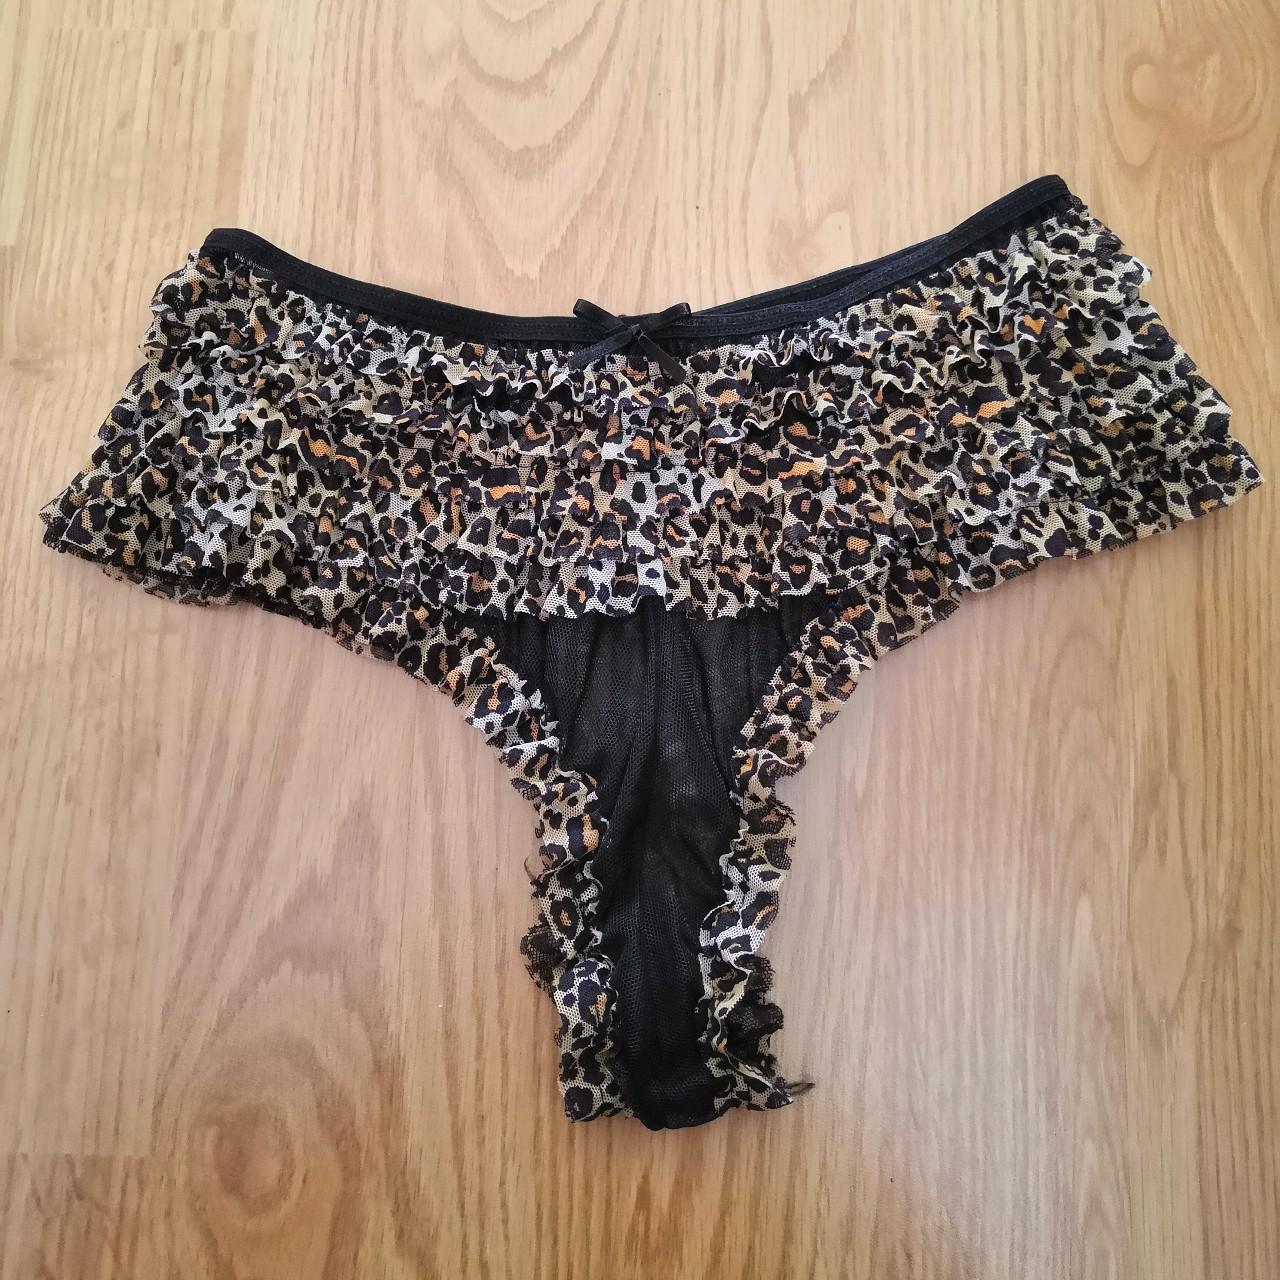 Product Image 3 - Leopard print ruffle frill frou